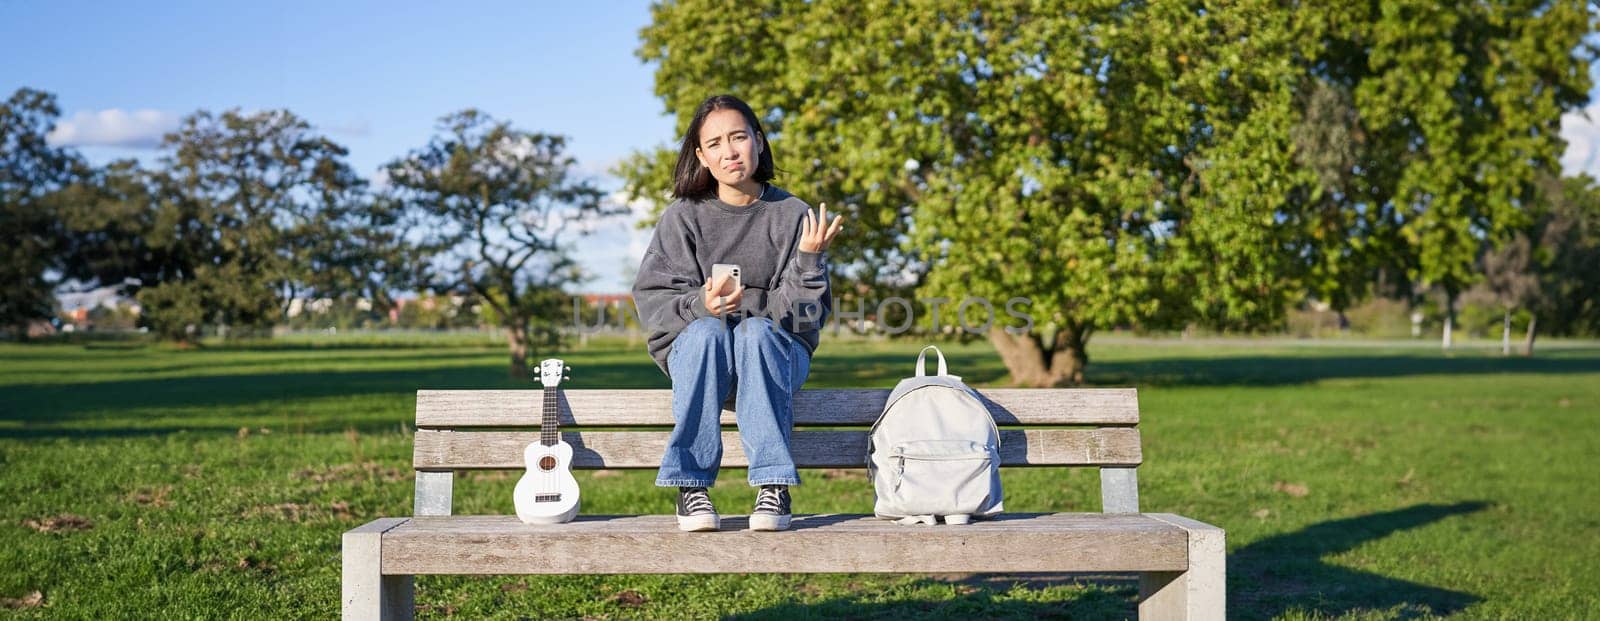 Girl with sad face, sitting on bench with smartphone and ukulele, looking upset and disappointed, being alone in park by Benzoix